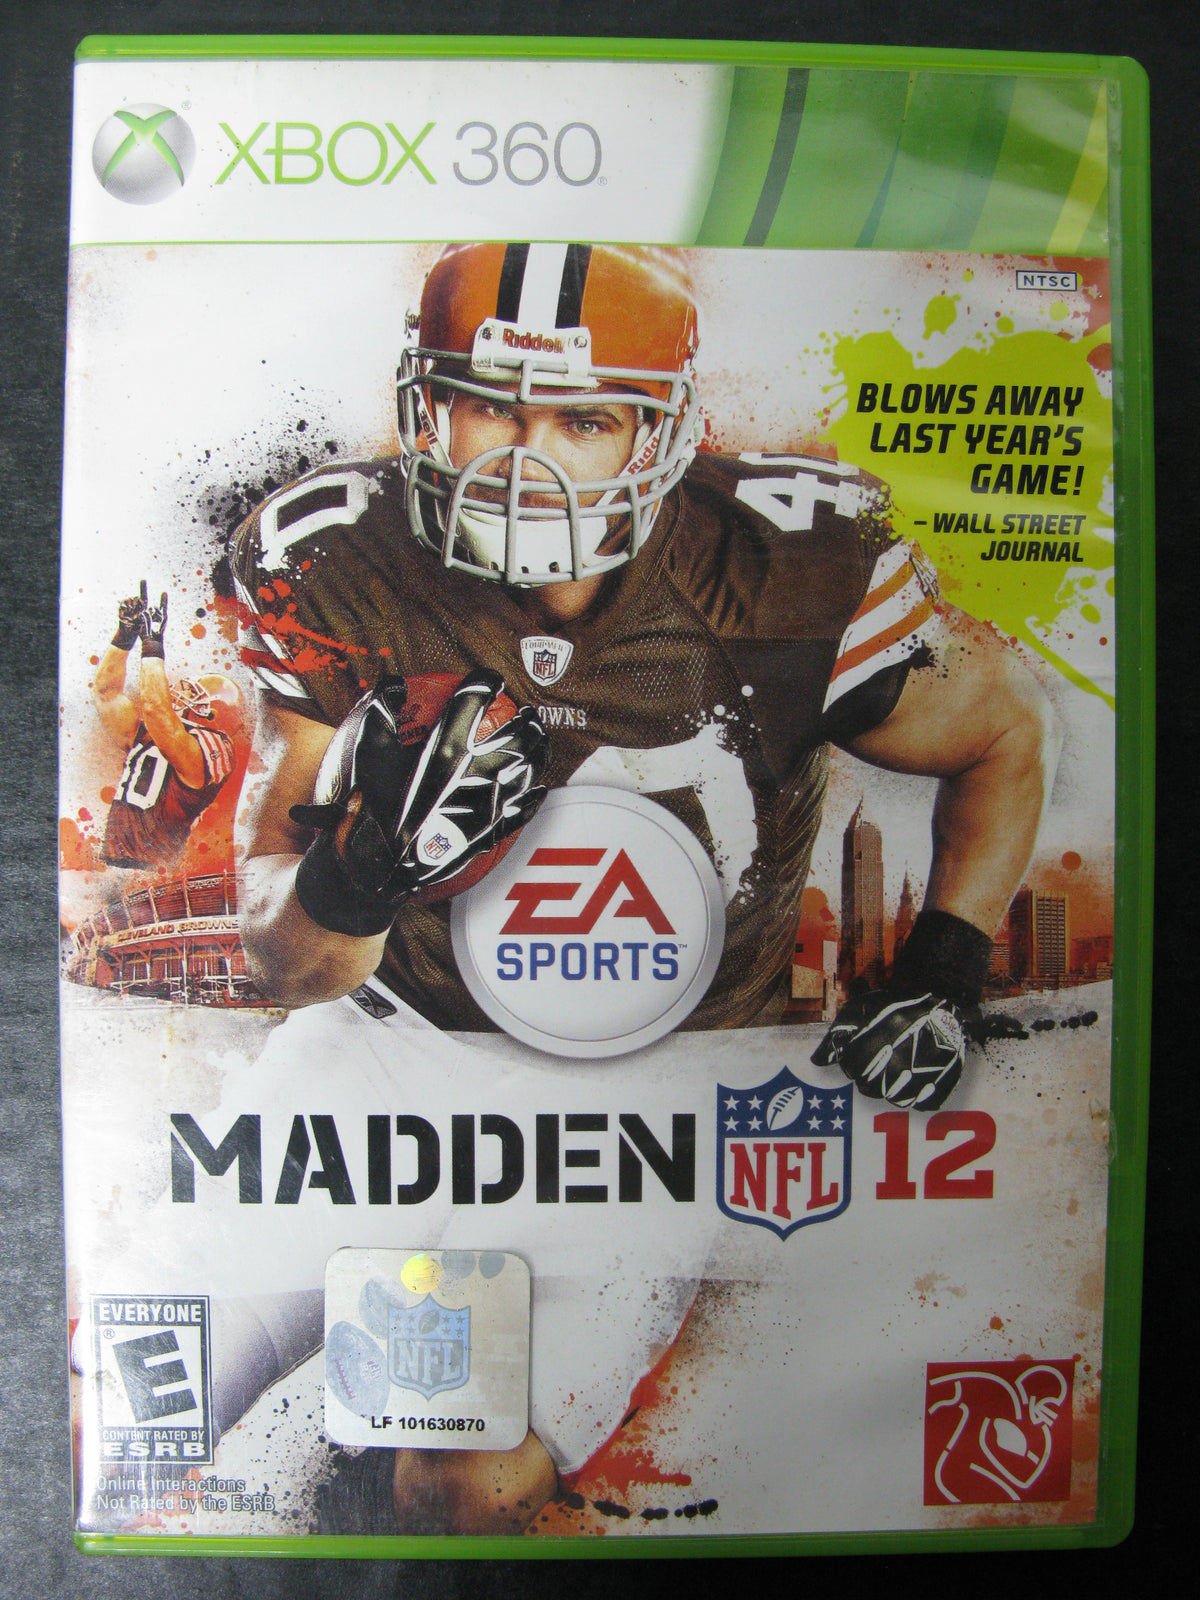 12 madden cover